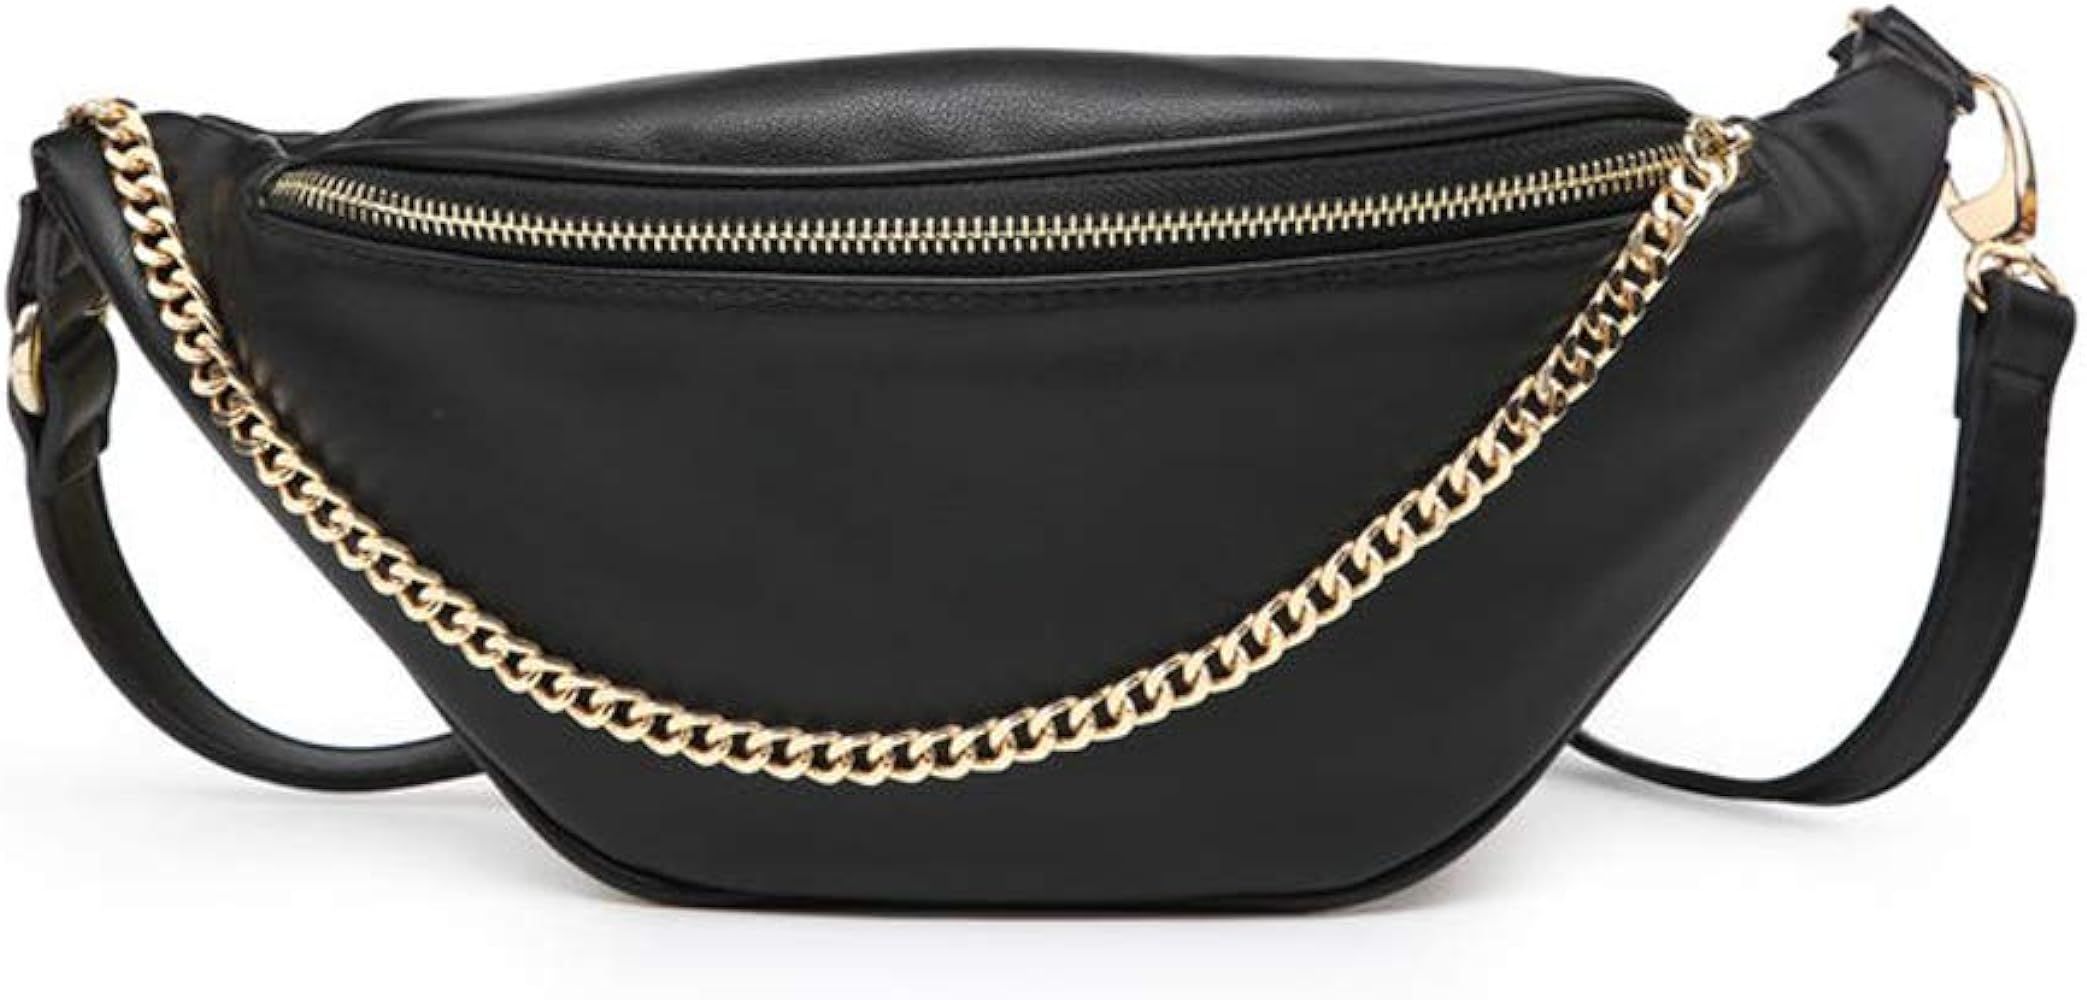 Fashion Leather Waist Fanny Pack Chest Bag Phone Purse with Metalic Chain for Women Black | Amazon (US)